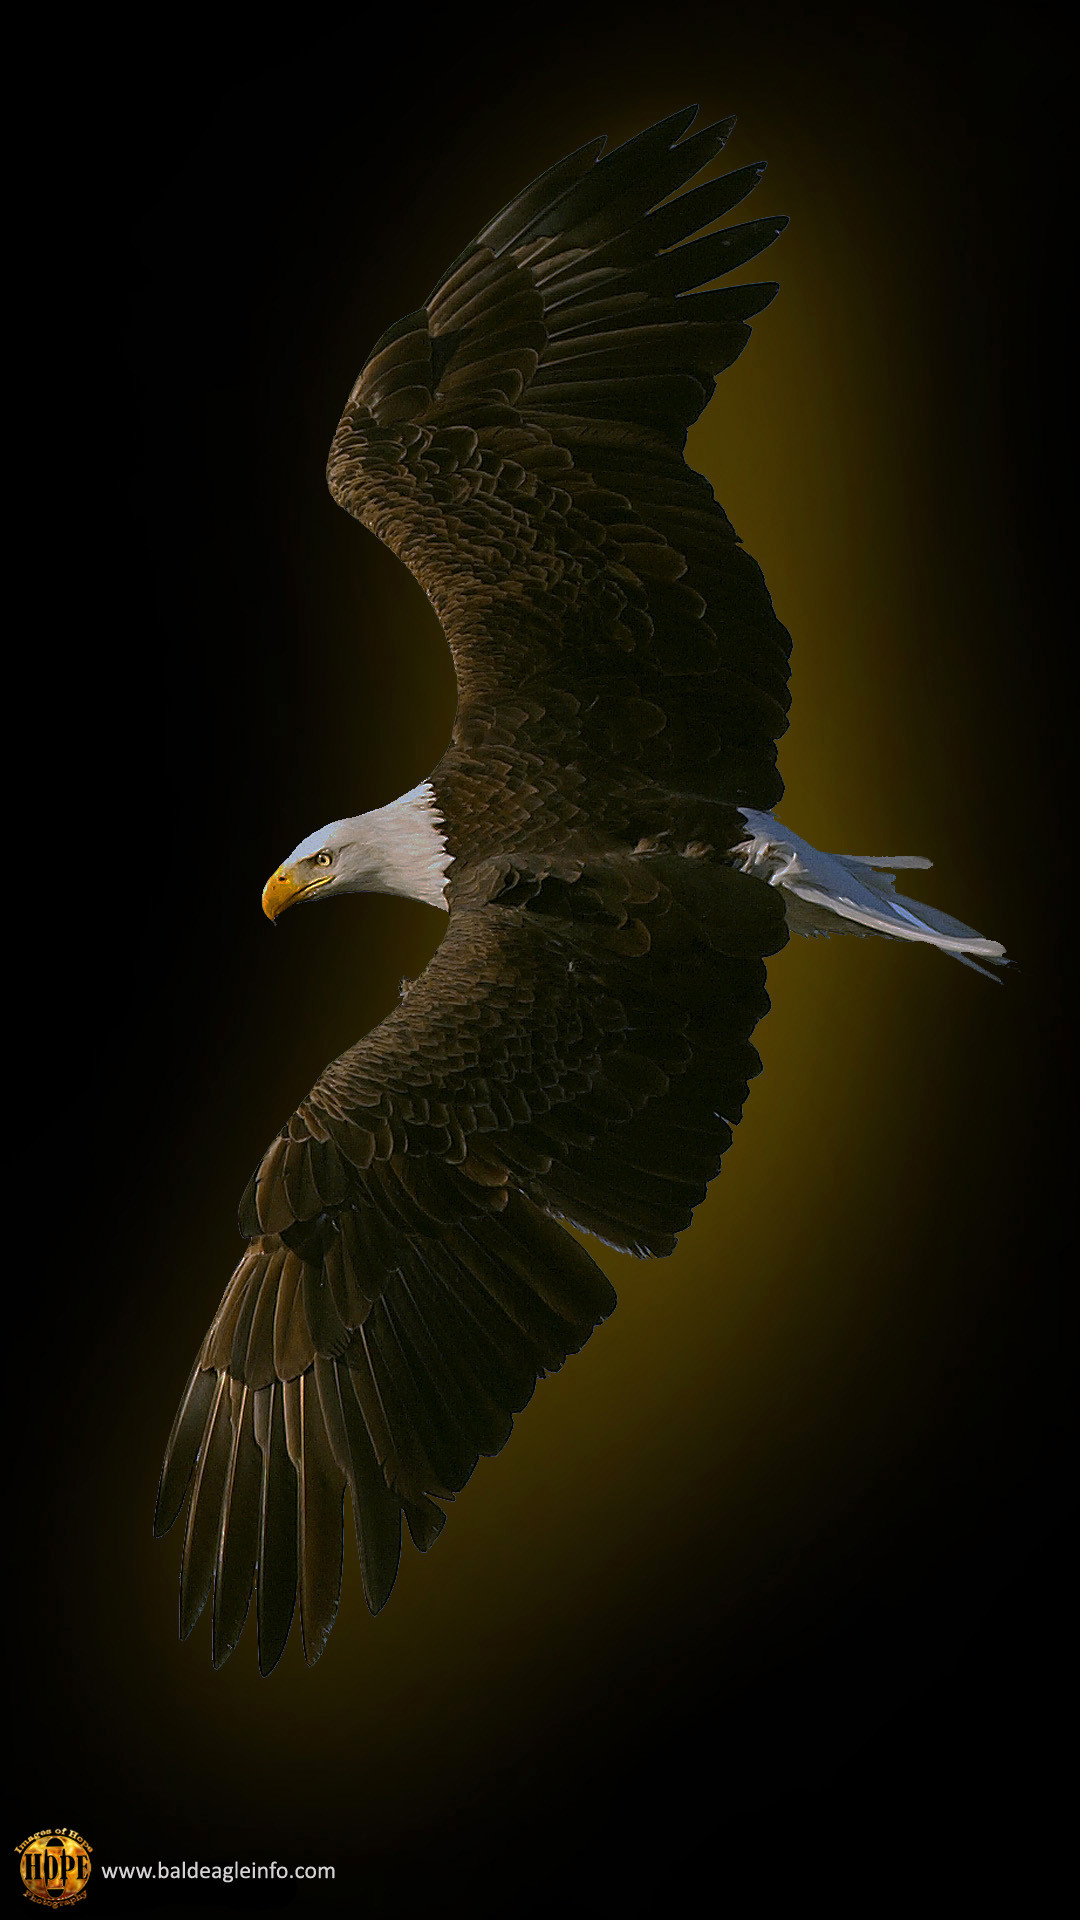 1080x1920 Bald eagle, graphic by Hope Rutledge